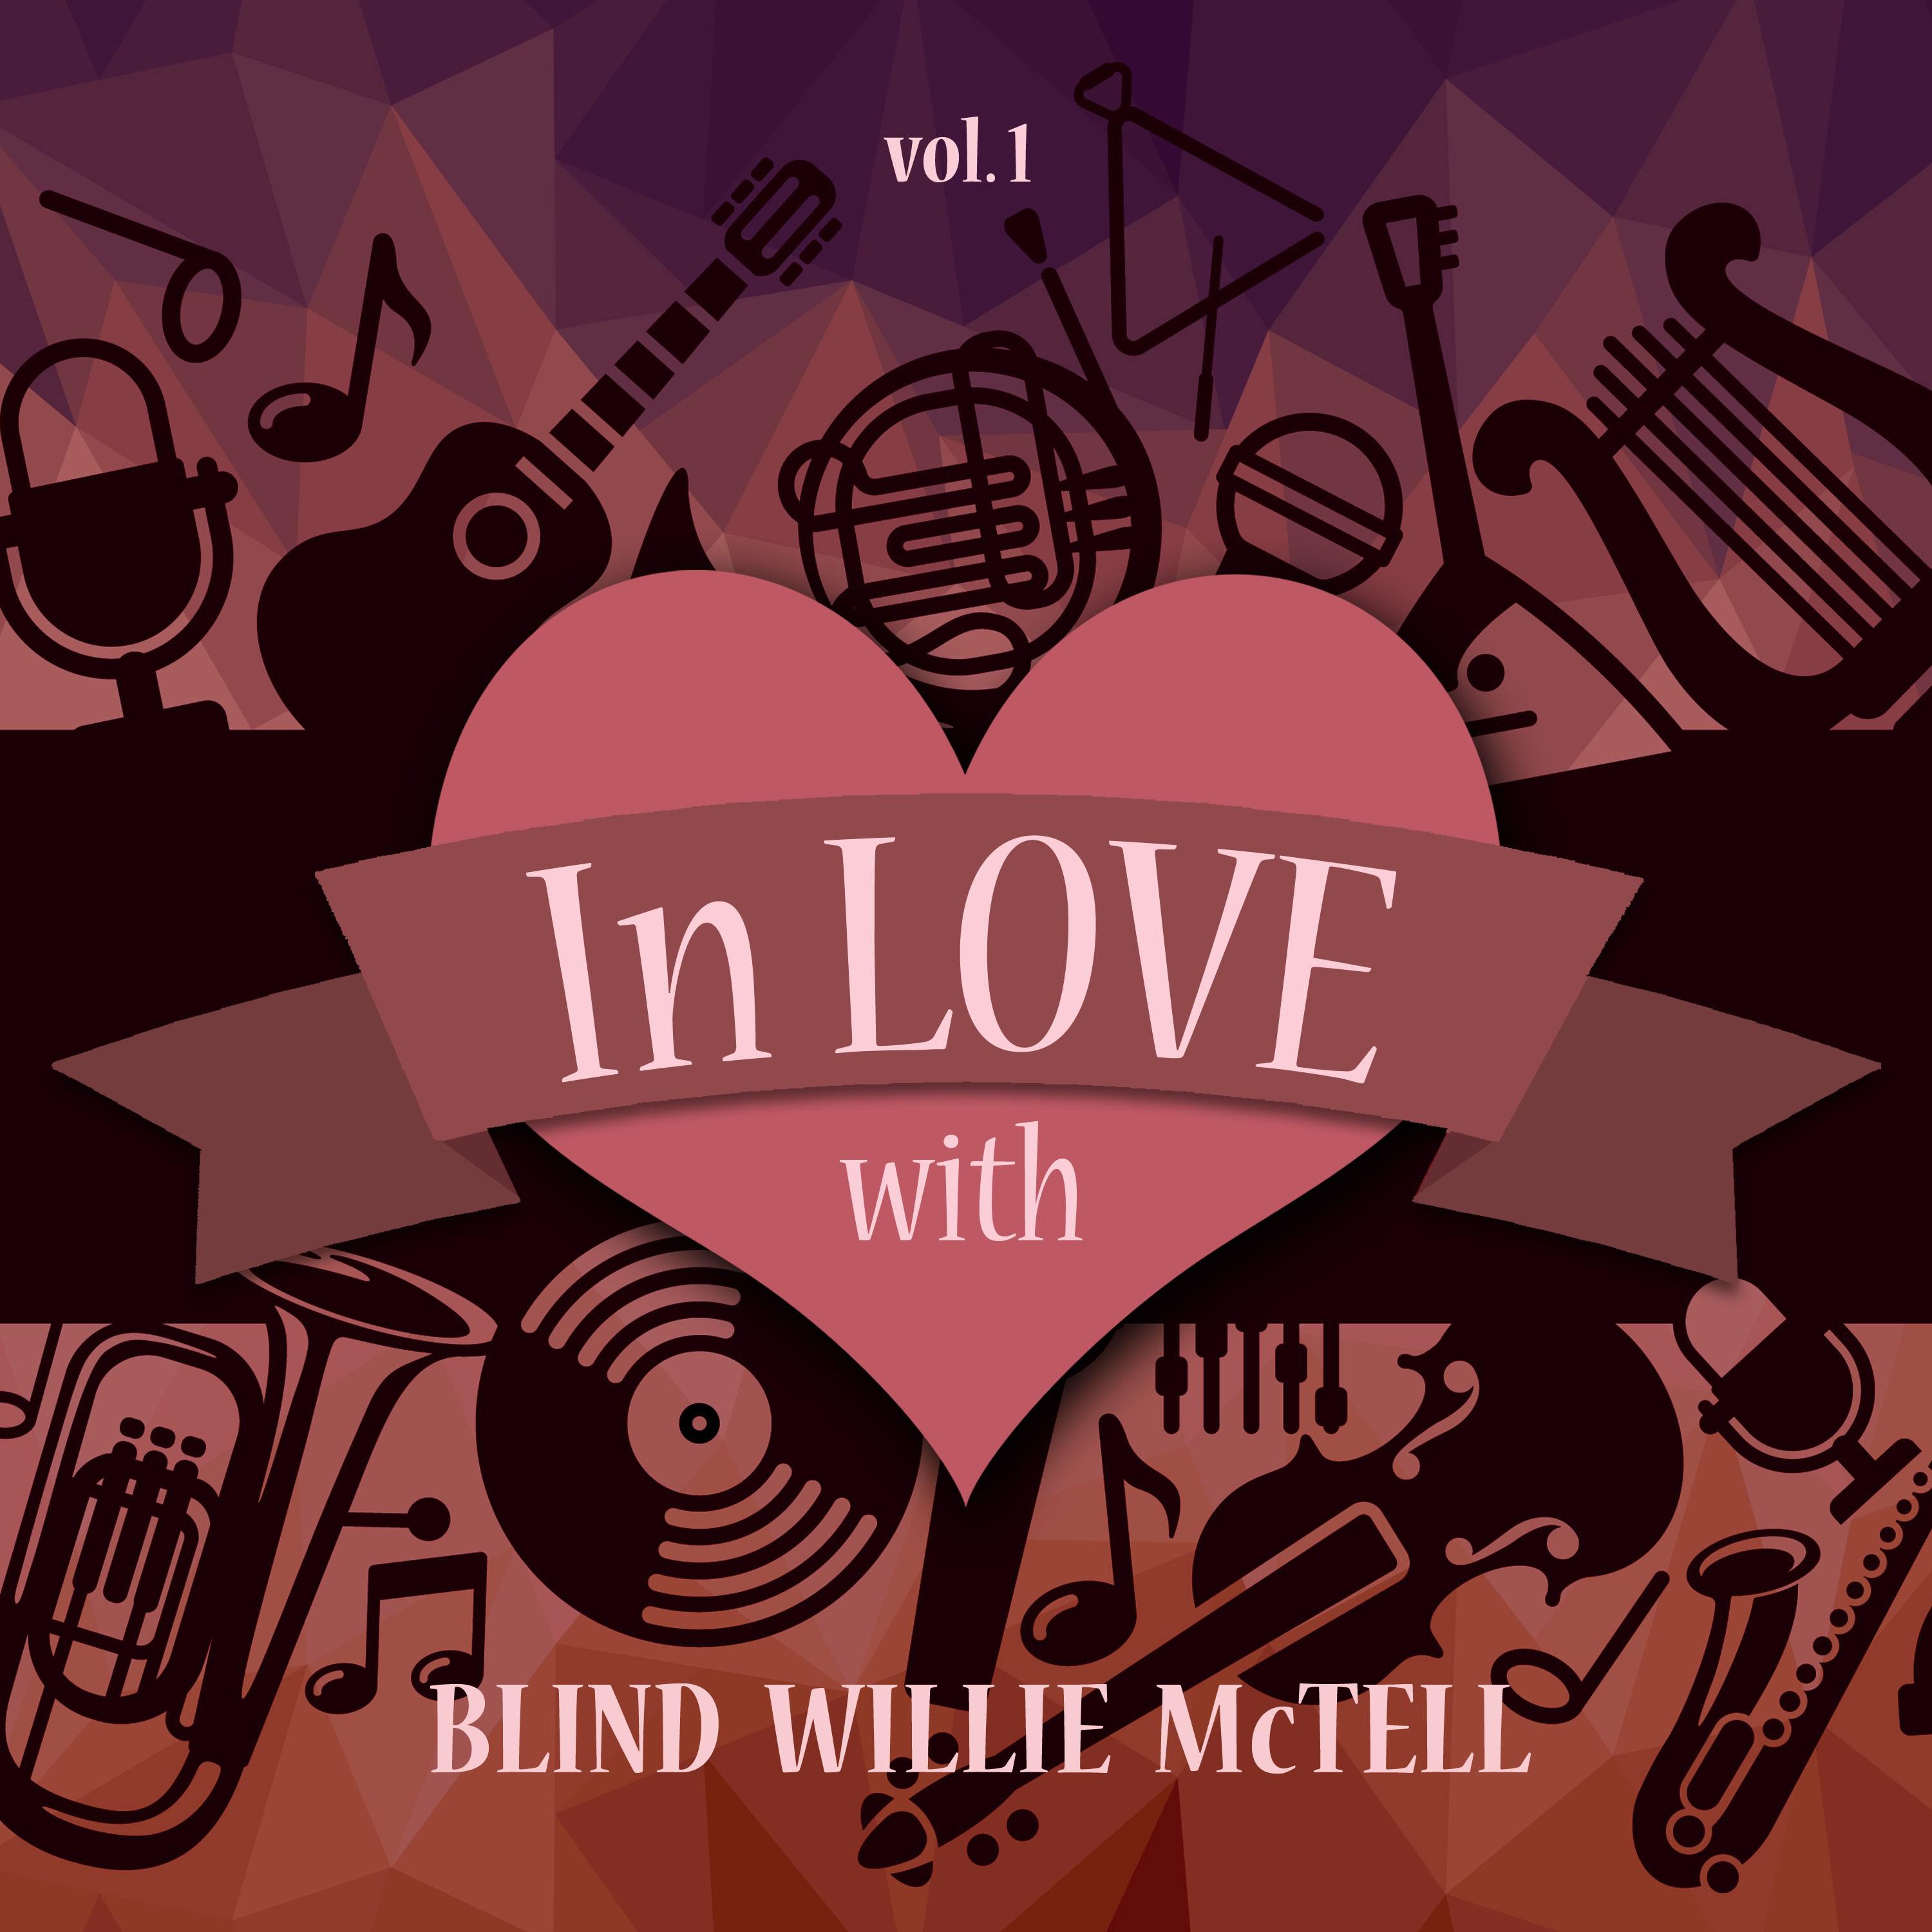 In Love with Blind Willie Mctell, Vol. 1